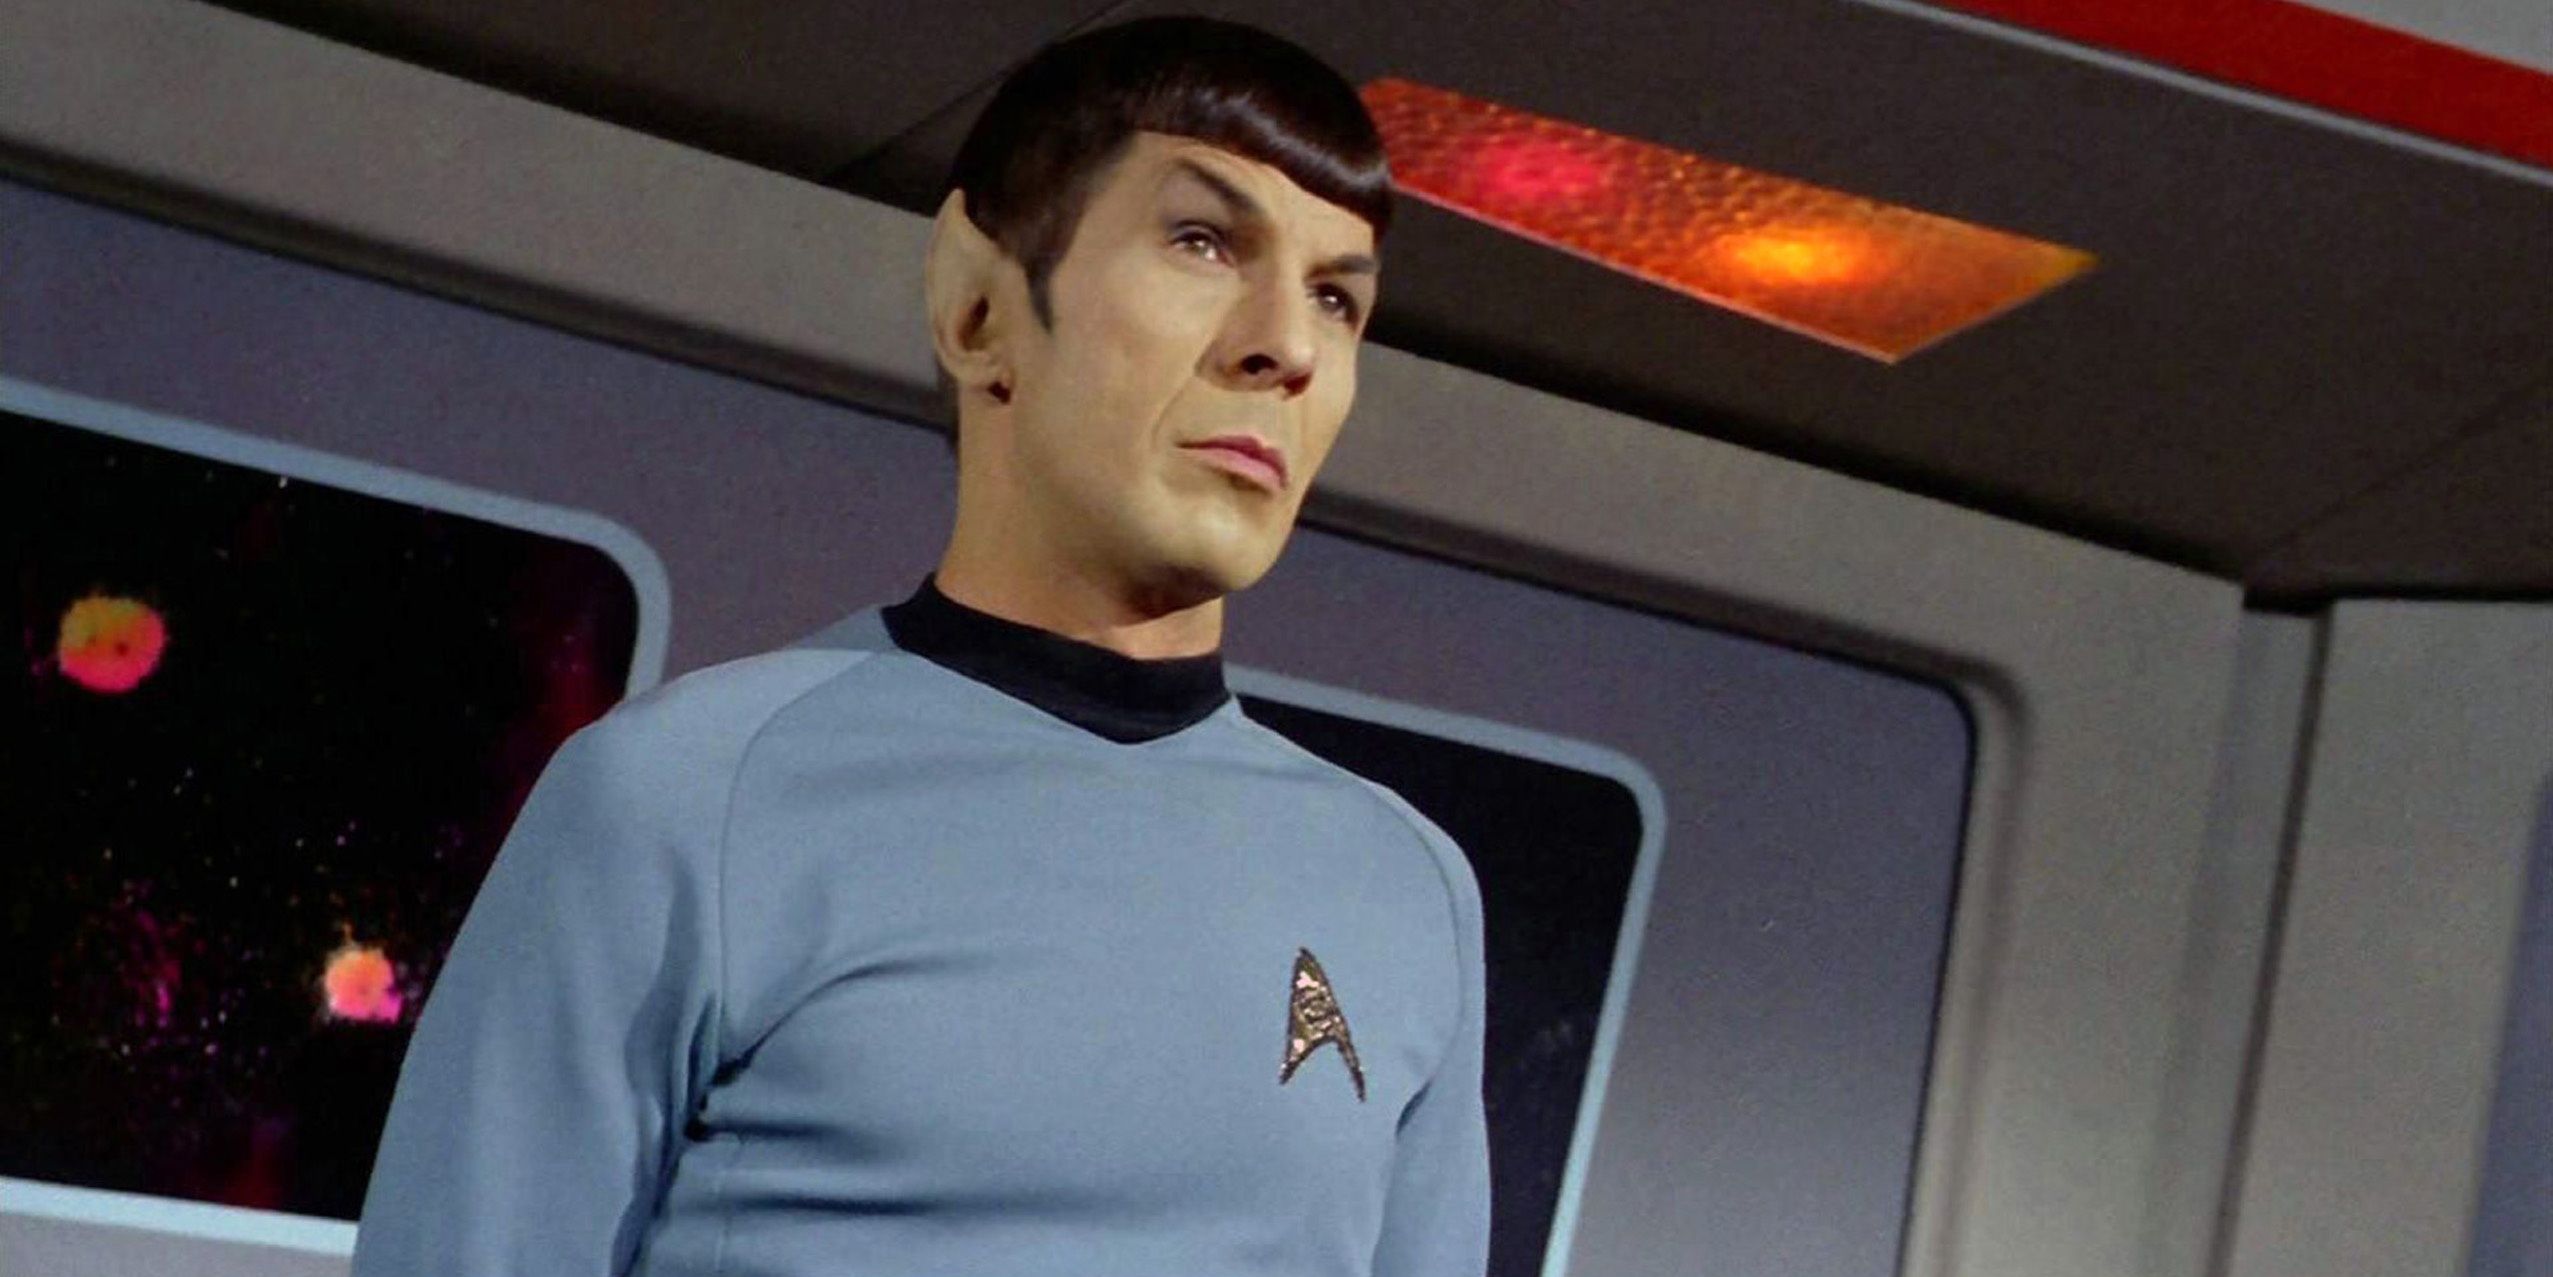 Concept of Spock Cropped